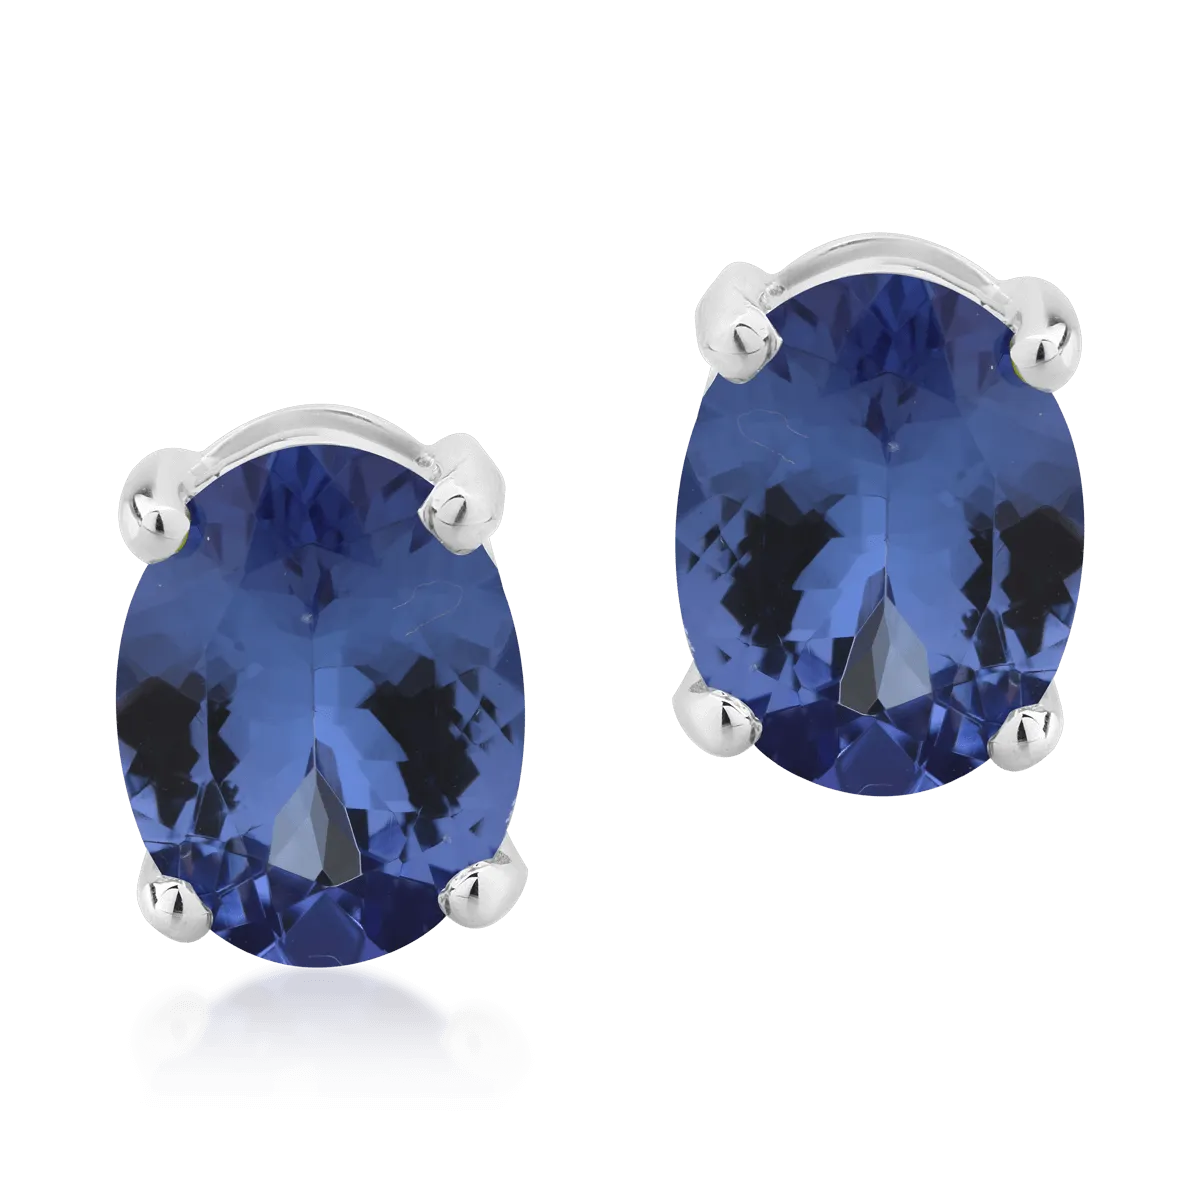 14K white gold earrings with 2.43ct tanzanite